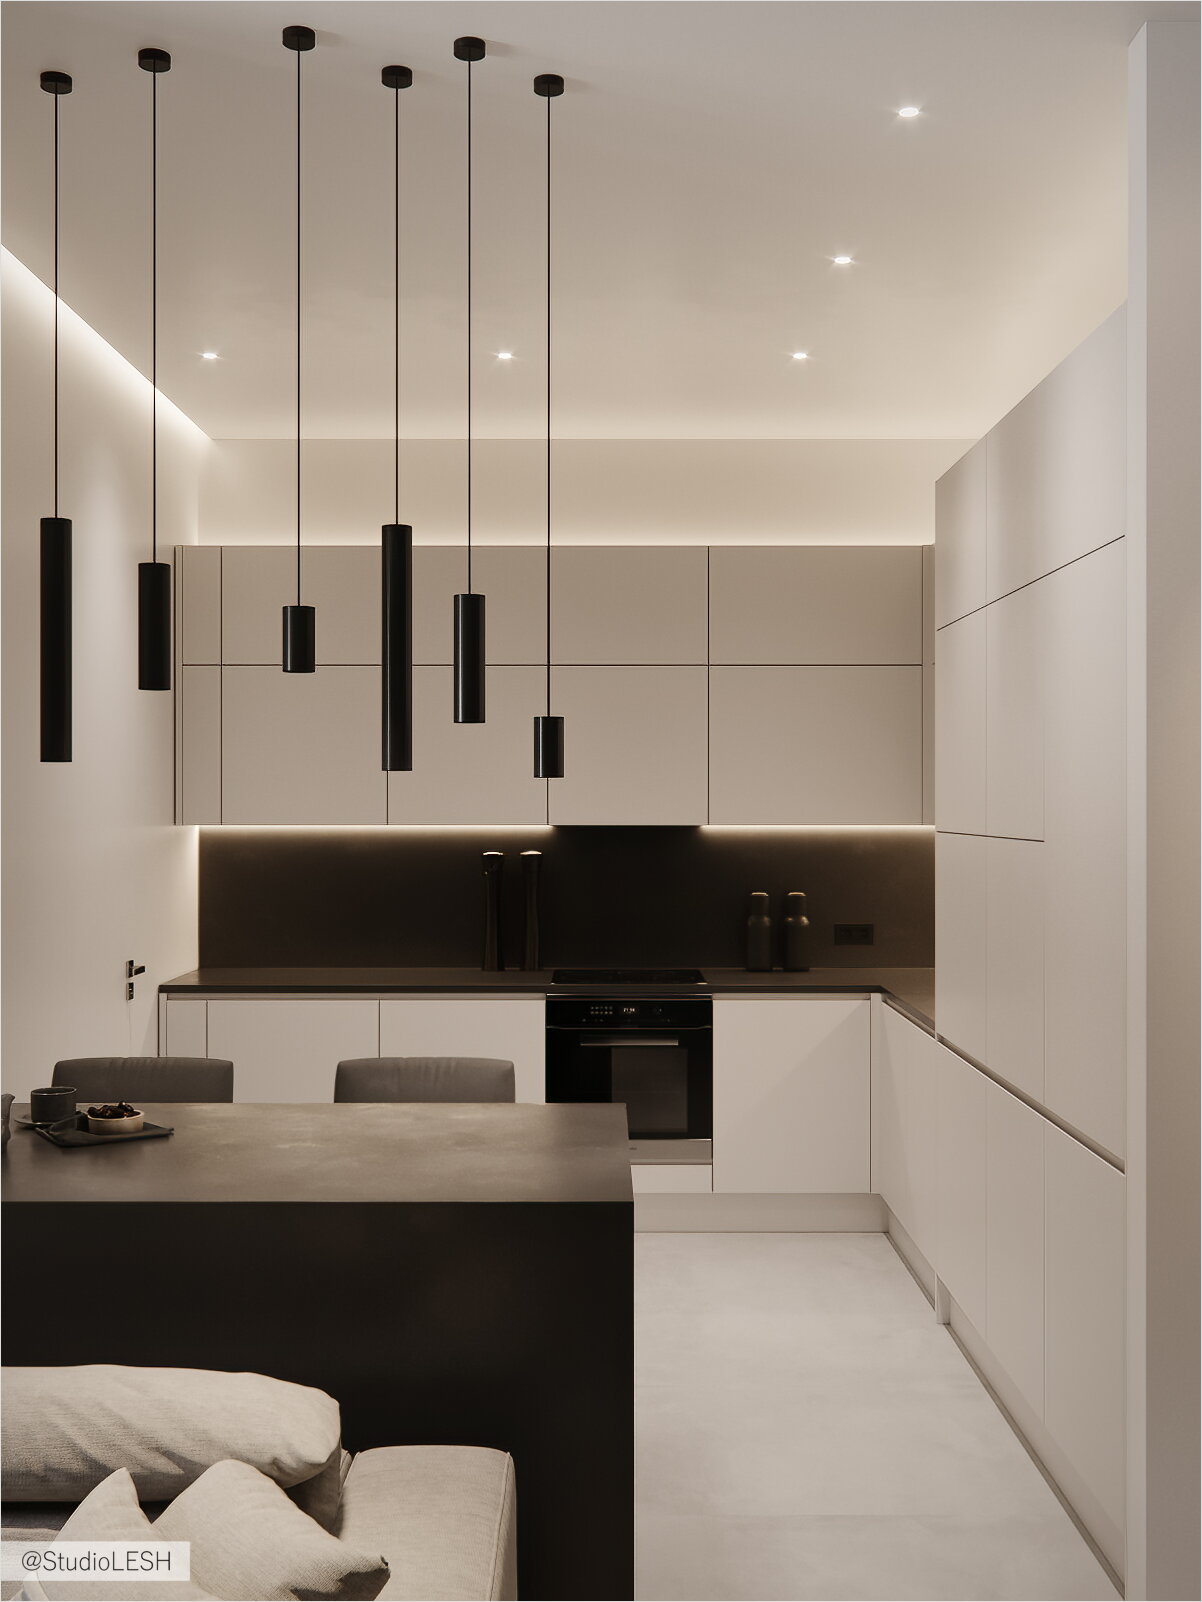 Bright kitchen with a black apron